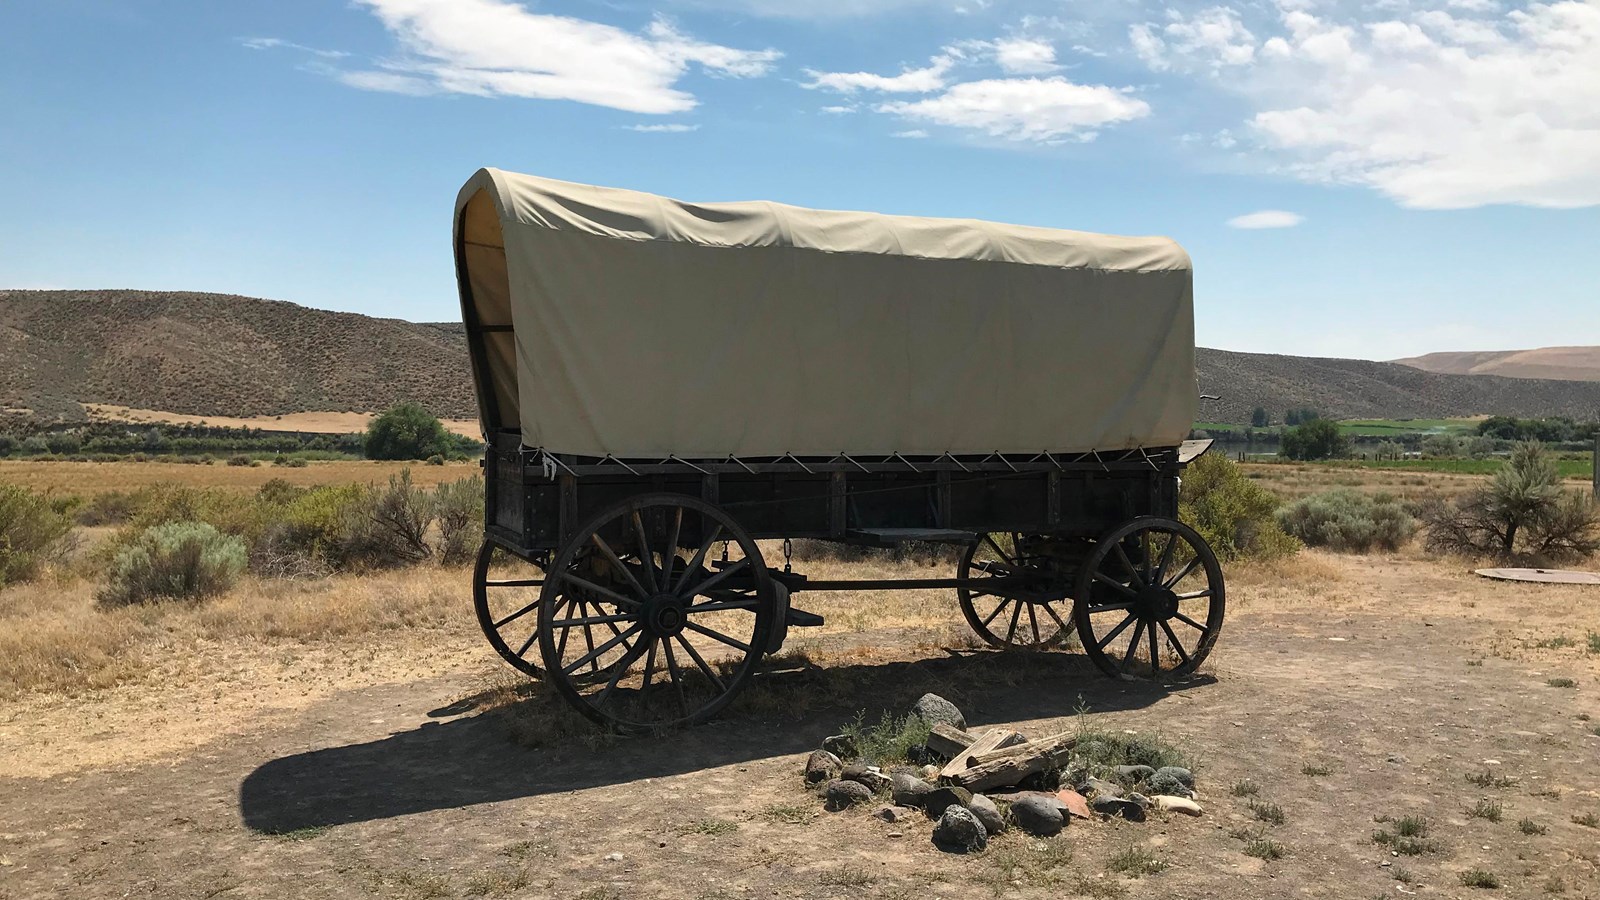 A covered wagon in a desert setting.